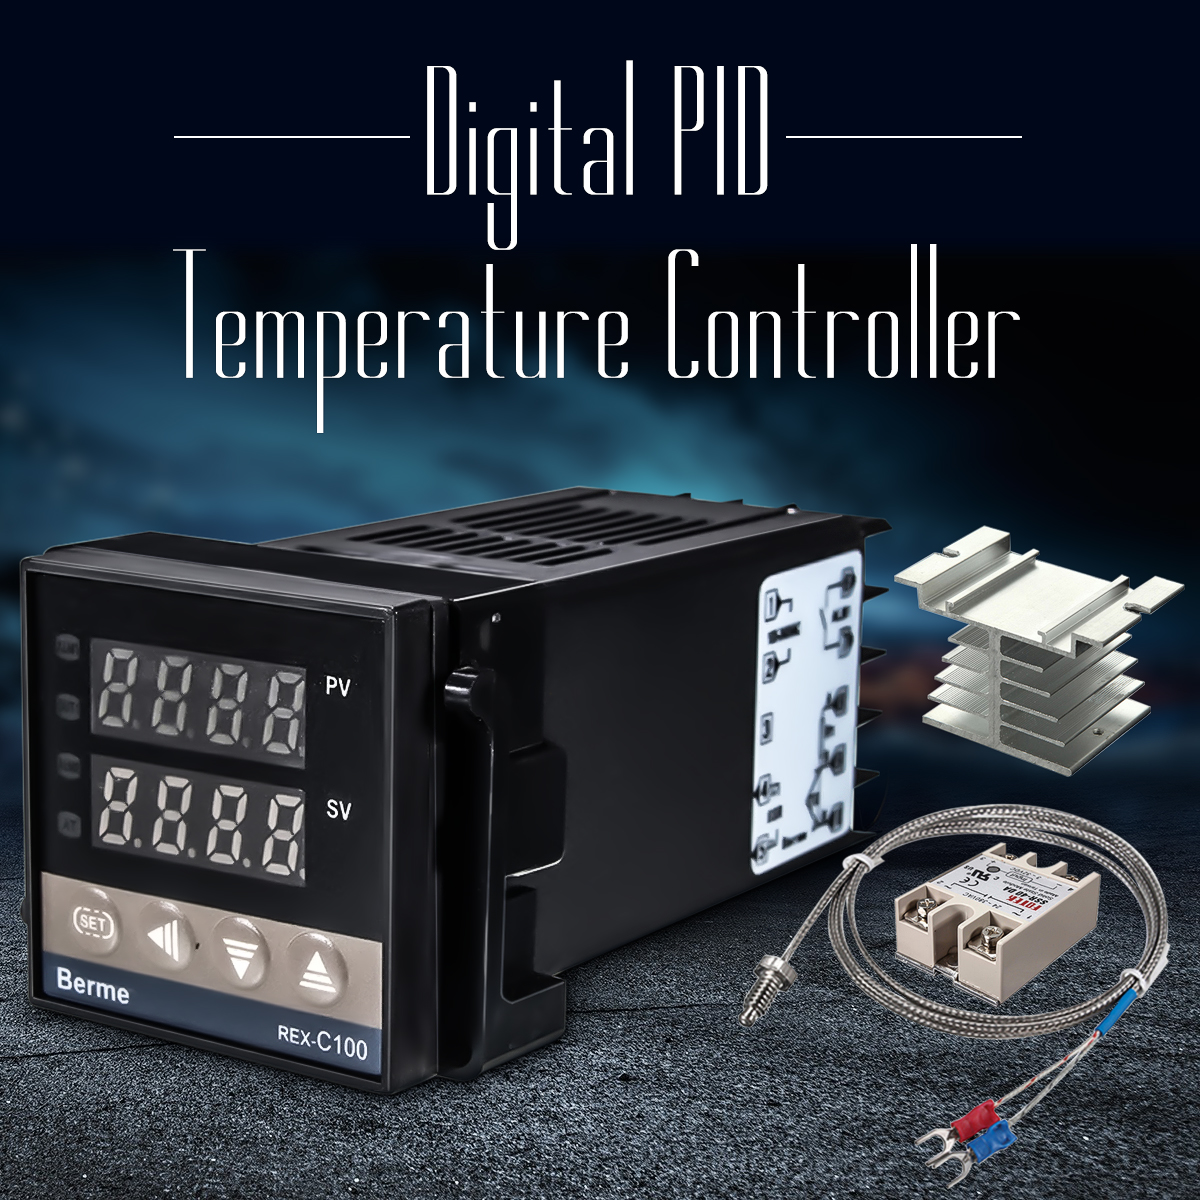 110-240V-01300-REX-C100-Digital-PID-Temperature-Controller-Kit-Alarm-Function-With-Probe-Relay-1351235-1